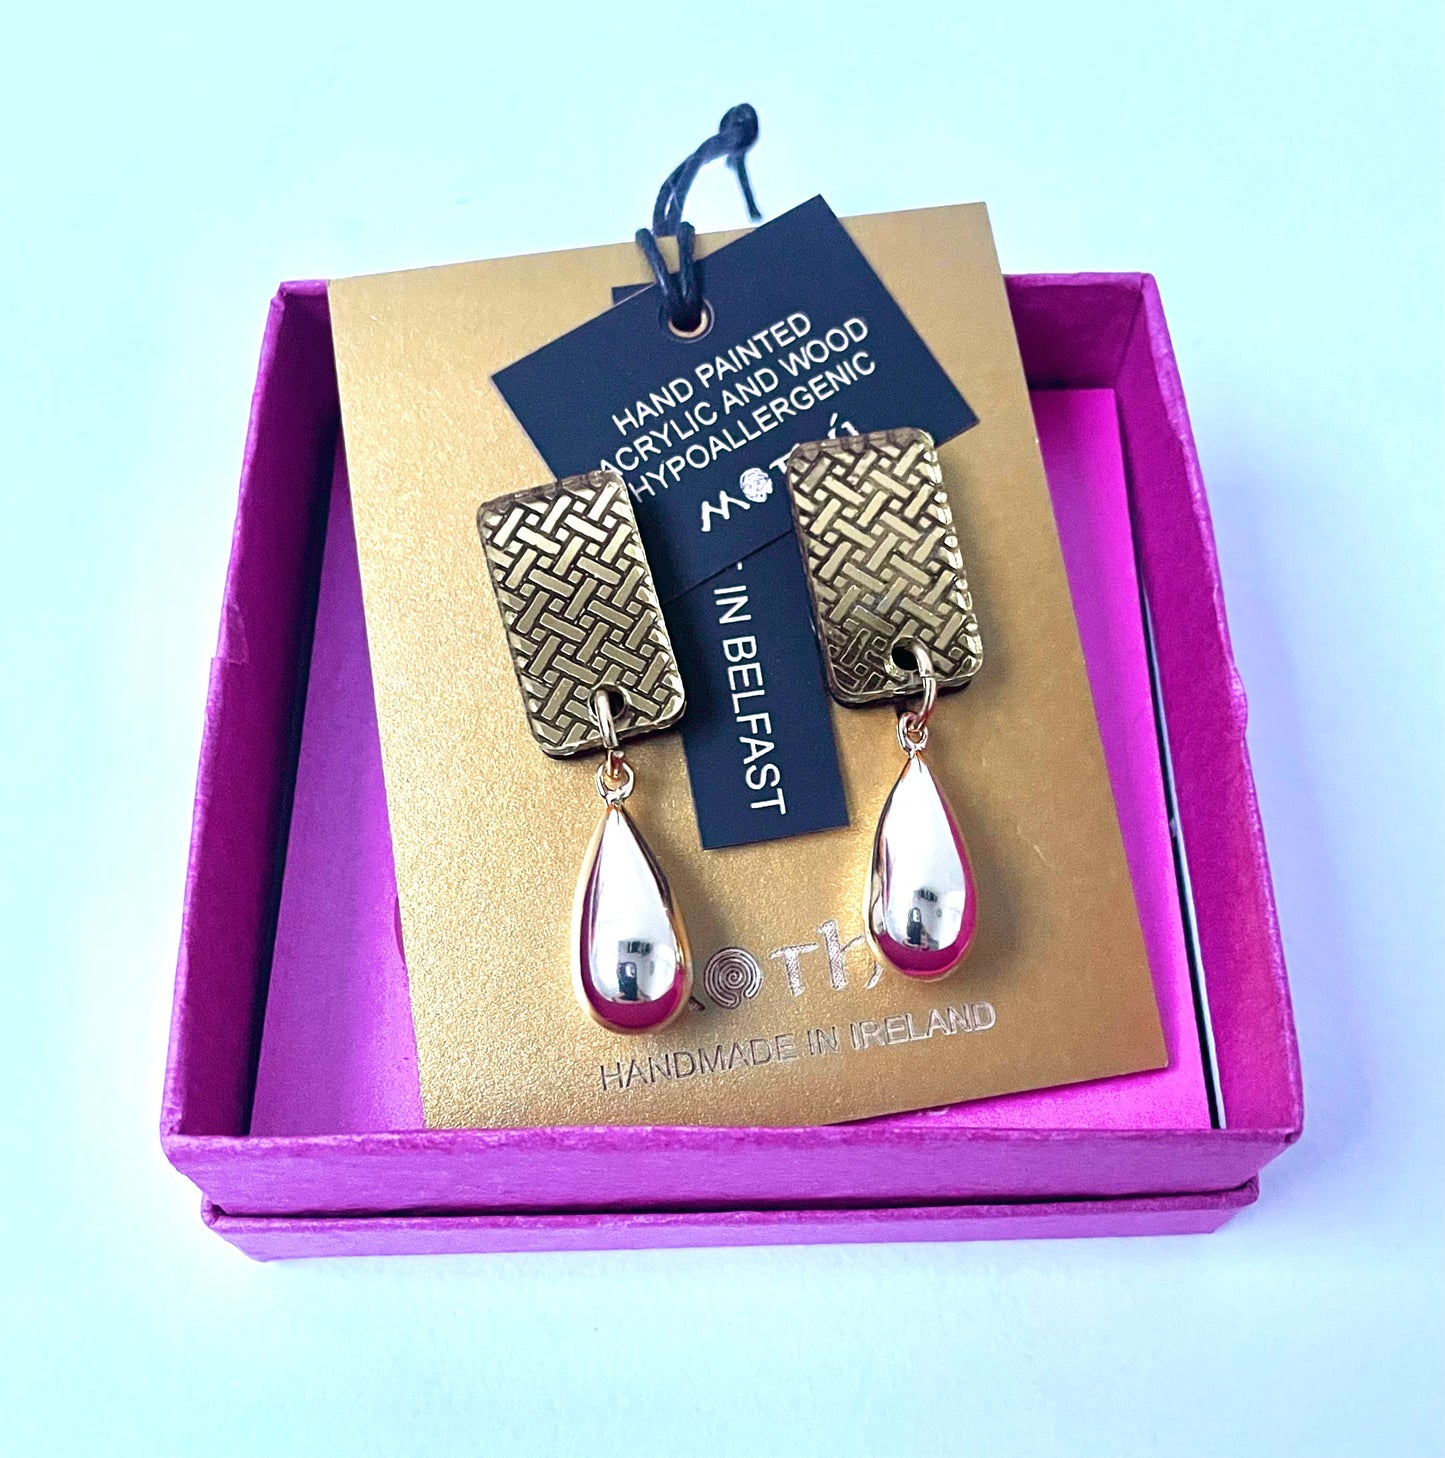 Etched Gold Mirror Stud Earrings with Gold Bead 4cm x 1cm x 0.6cm